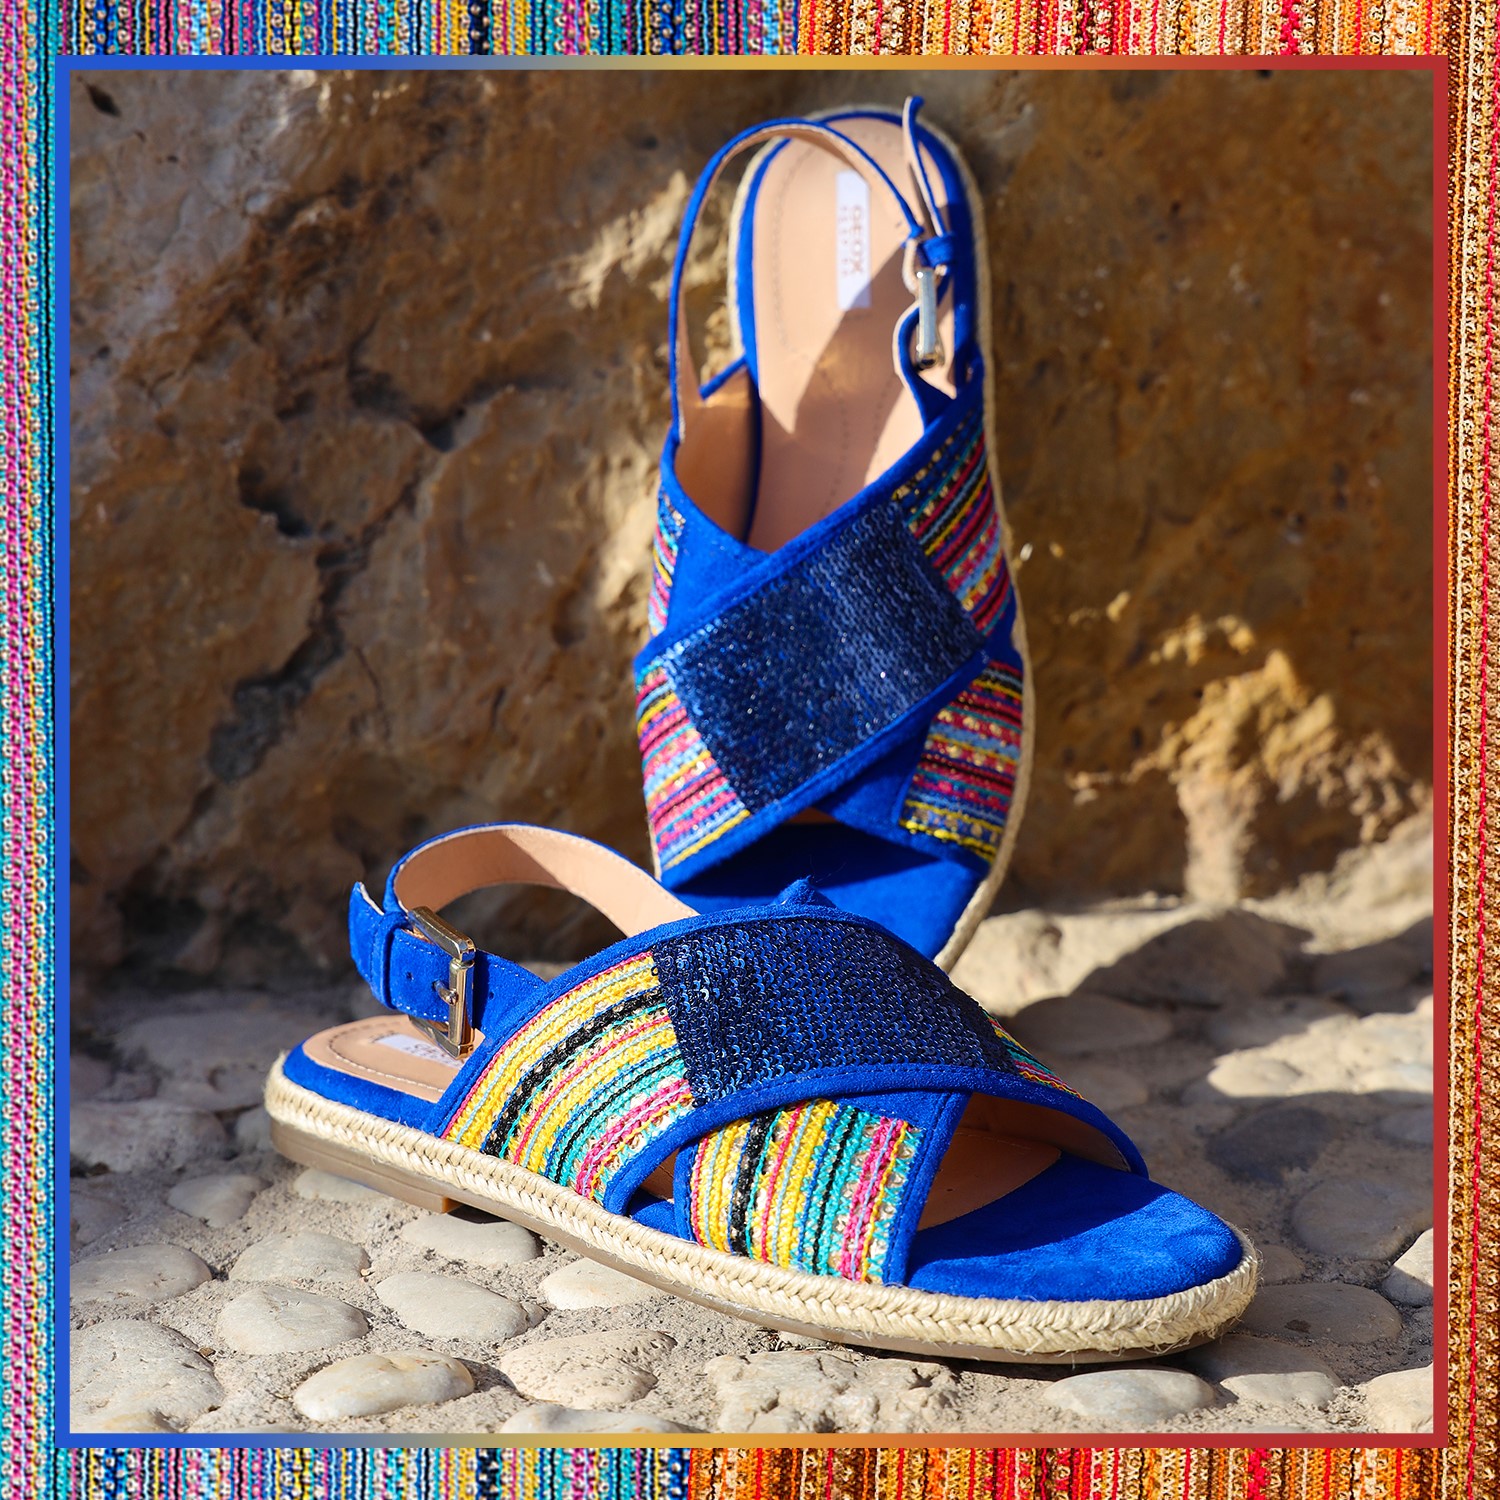 Inspired by the famous Selaron Staircase in Brazil, these vivid espadrilles will brighten up your summer in style. 